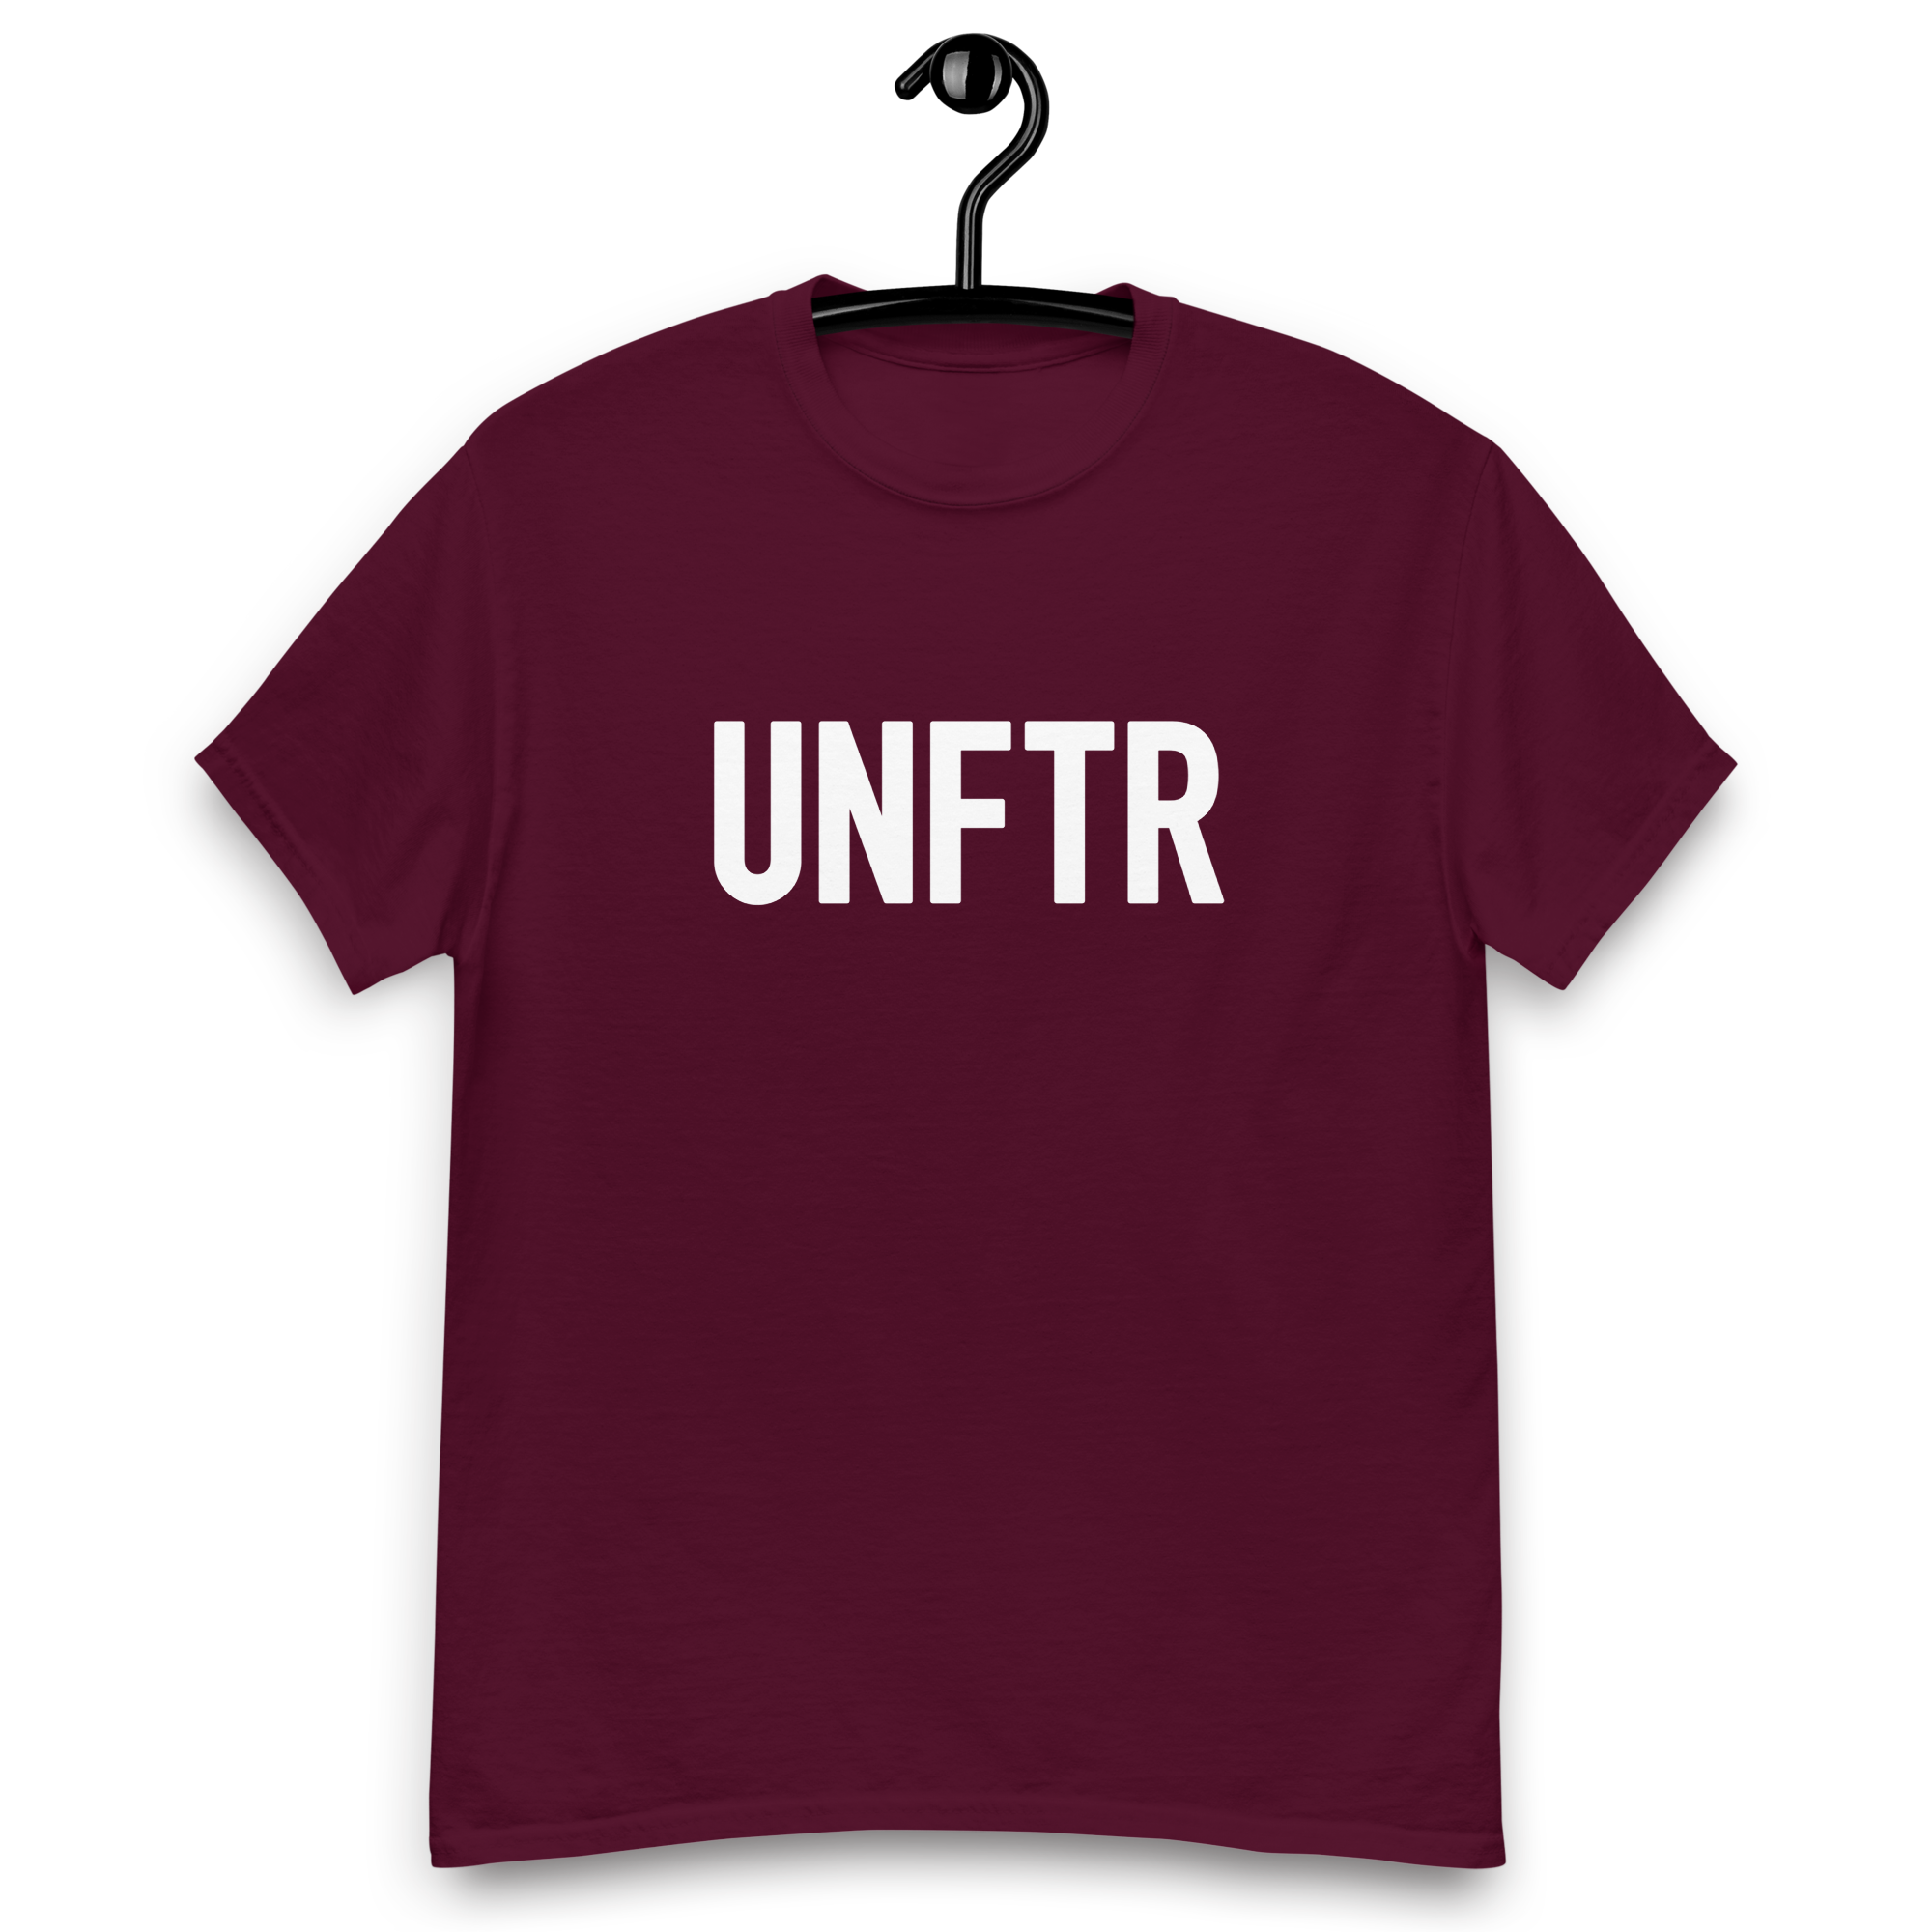 Maroon tee shirt that says UNFTR in white on the front and Meeting People Where They Art in white on the back